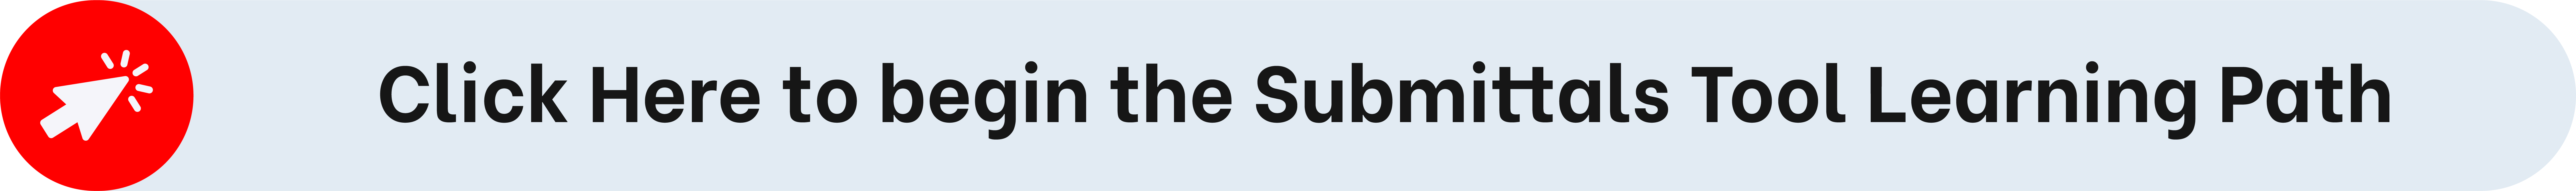 Submittals_Button.png